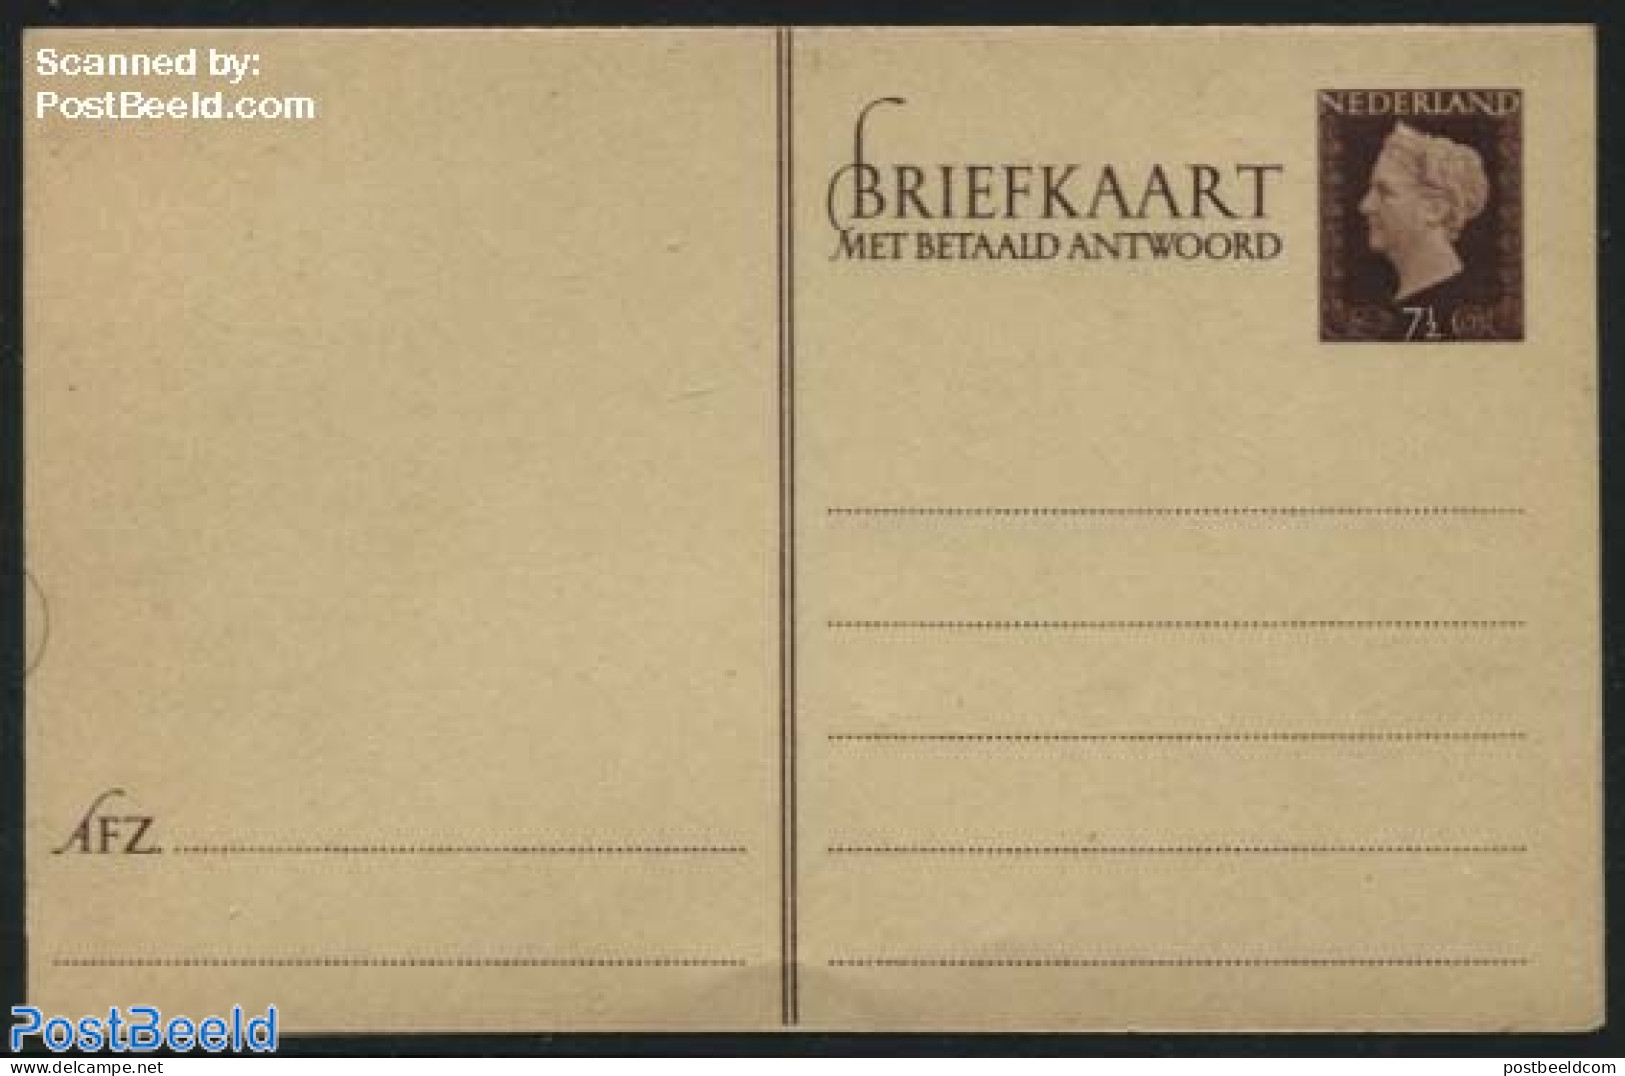 Netherlands 1947 Reply Paid Postcard 7.5+7.5c, Unused Postal Stationary - Lettres & Documents